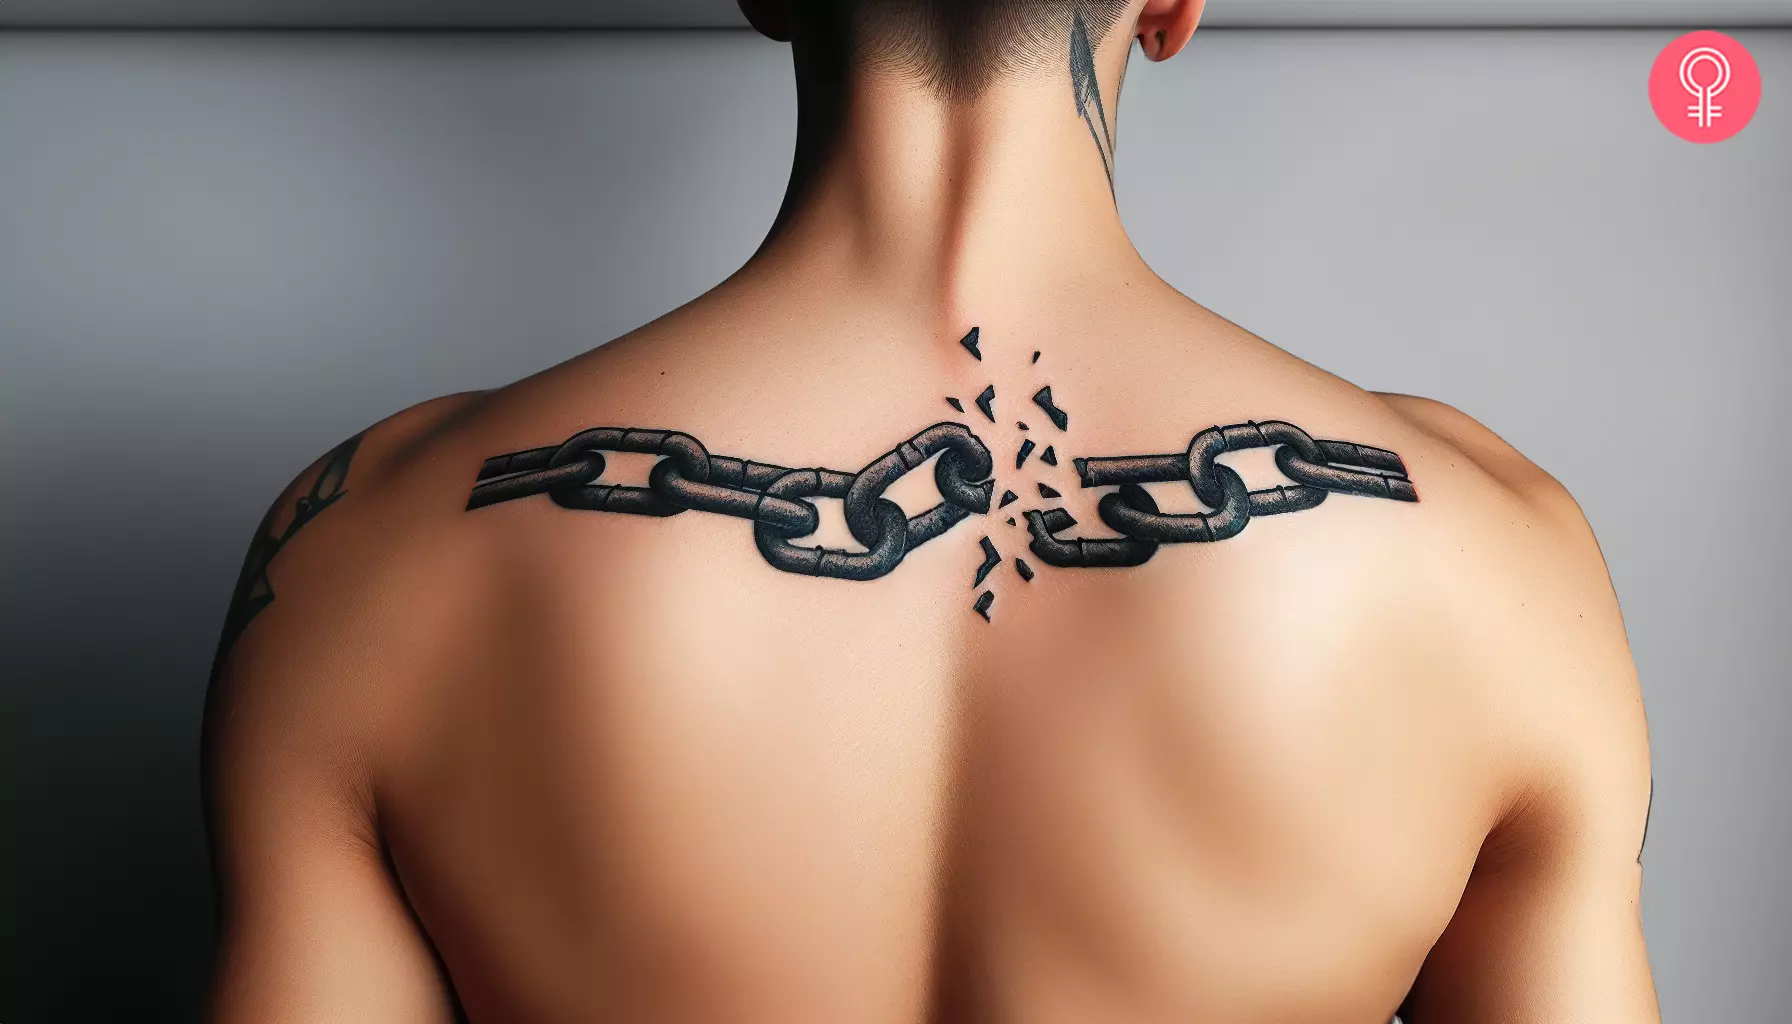 A man with a broken chain freedom tattoo on the upper back